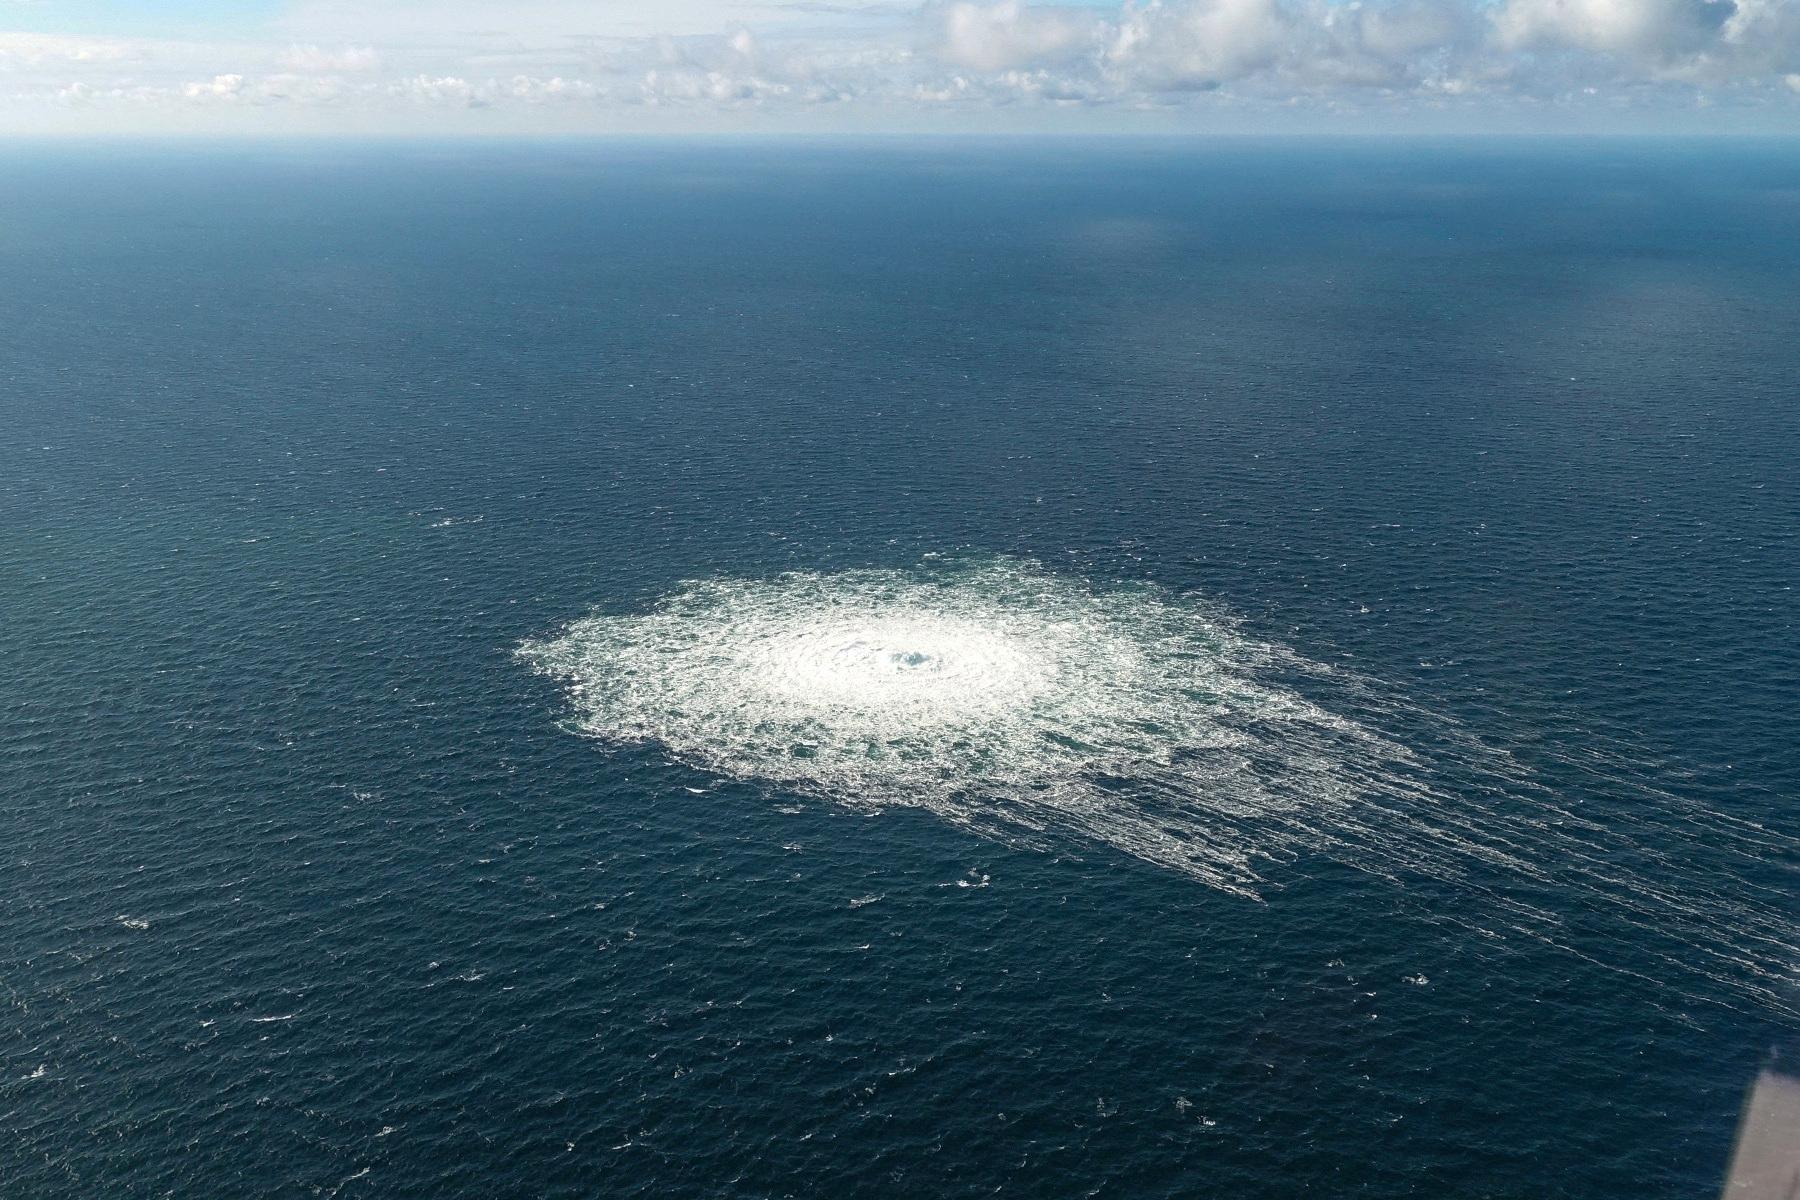 Explosion: Bubbles appear on the surface after an explosion in the Baltic Sea.